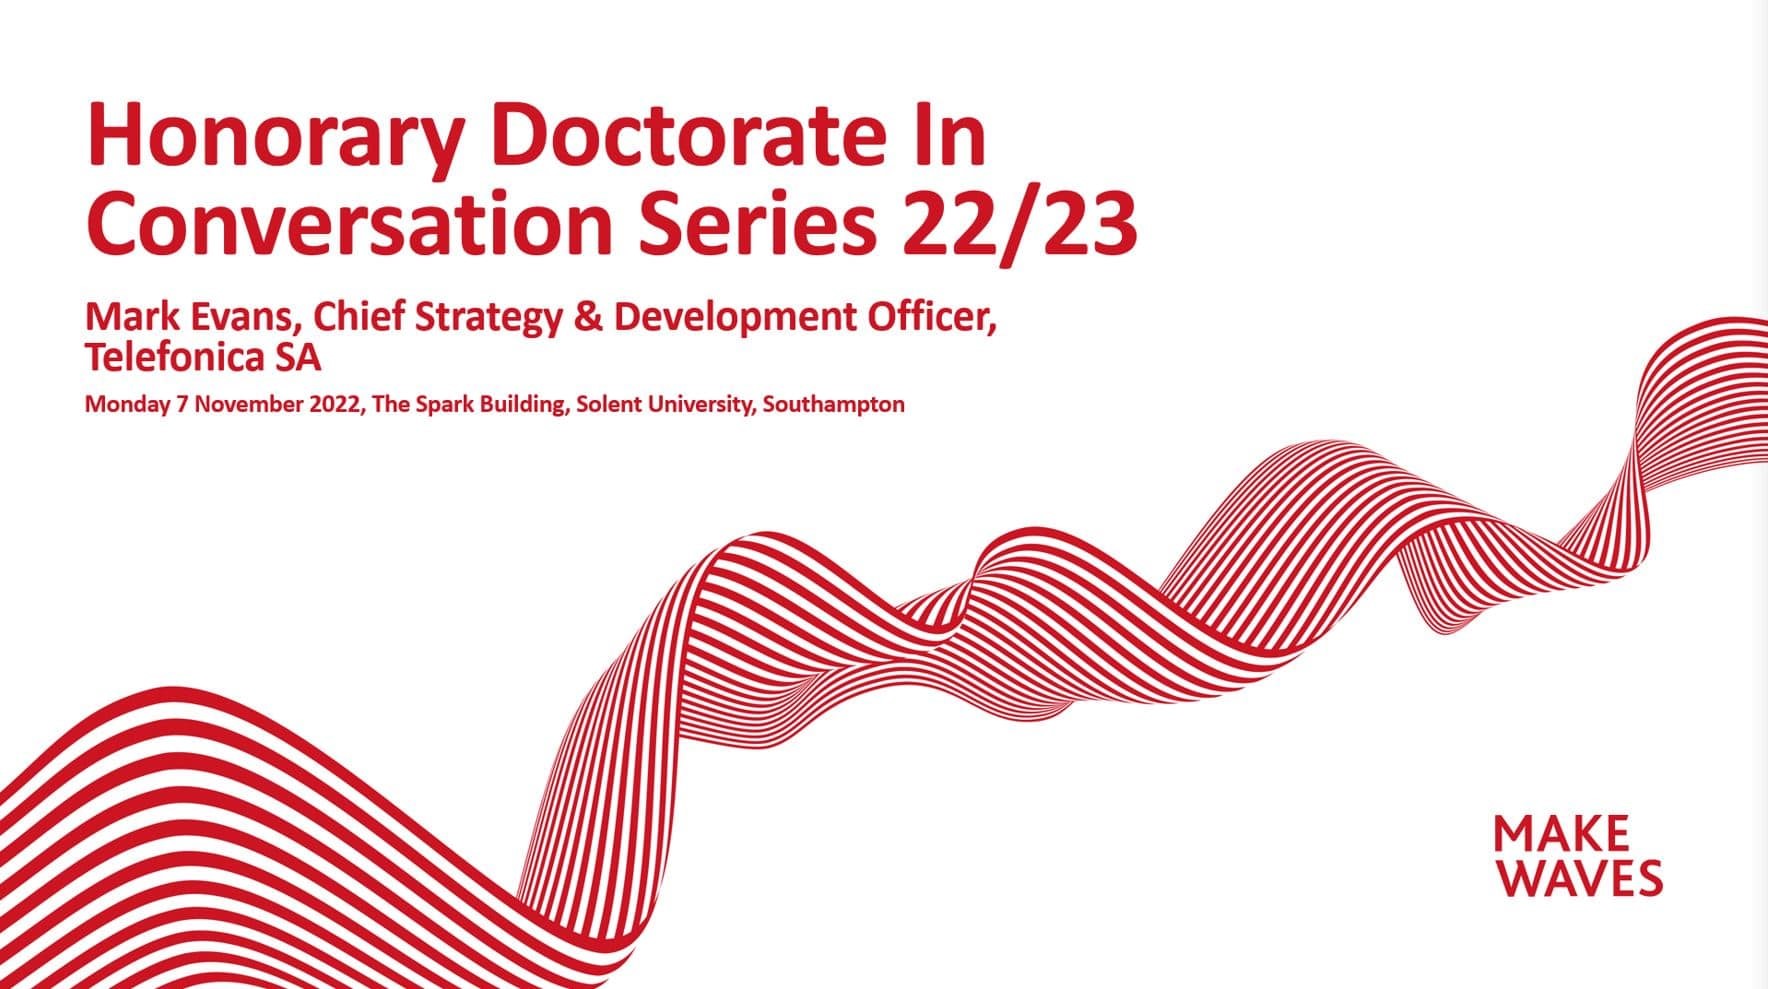 Solent University MAKE WAVES - Honorary Doctorate In Conversation Series 22/23. Mark Evans, Chief Strategy & Development Officer, Telefonica SA